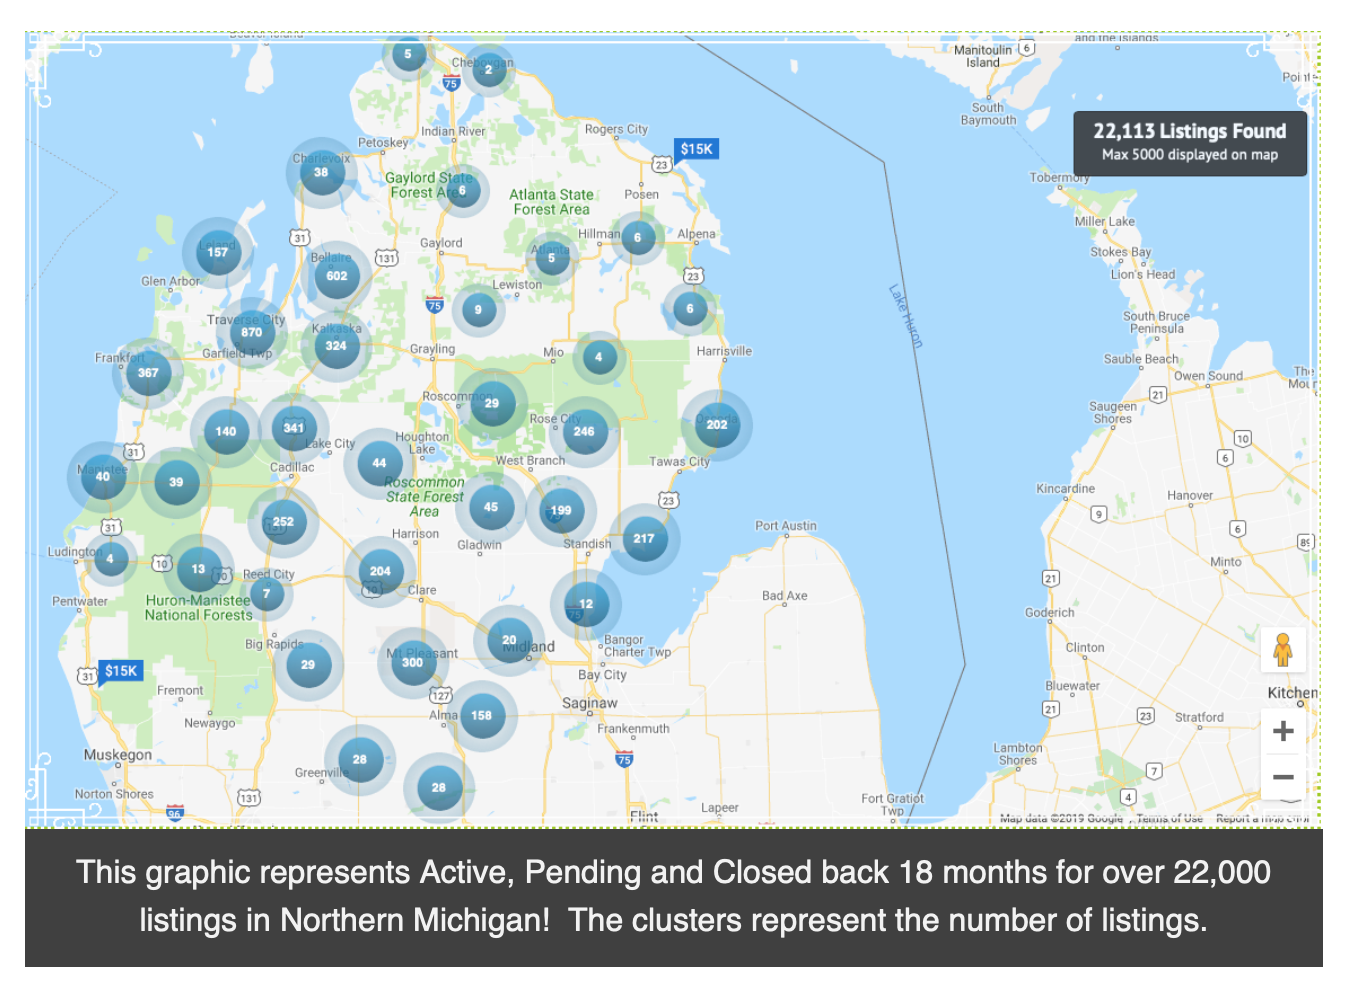 22,113 Listings Displayed in Northern Michigan over the past 18 Months